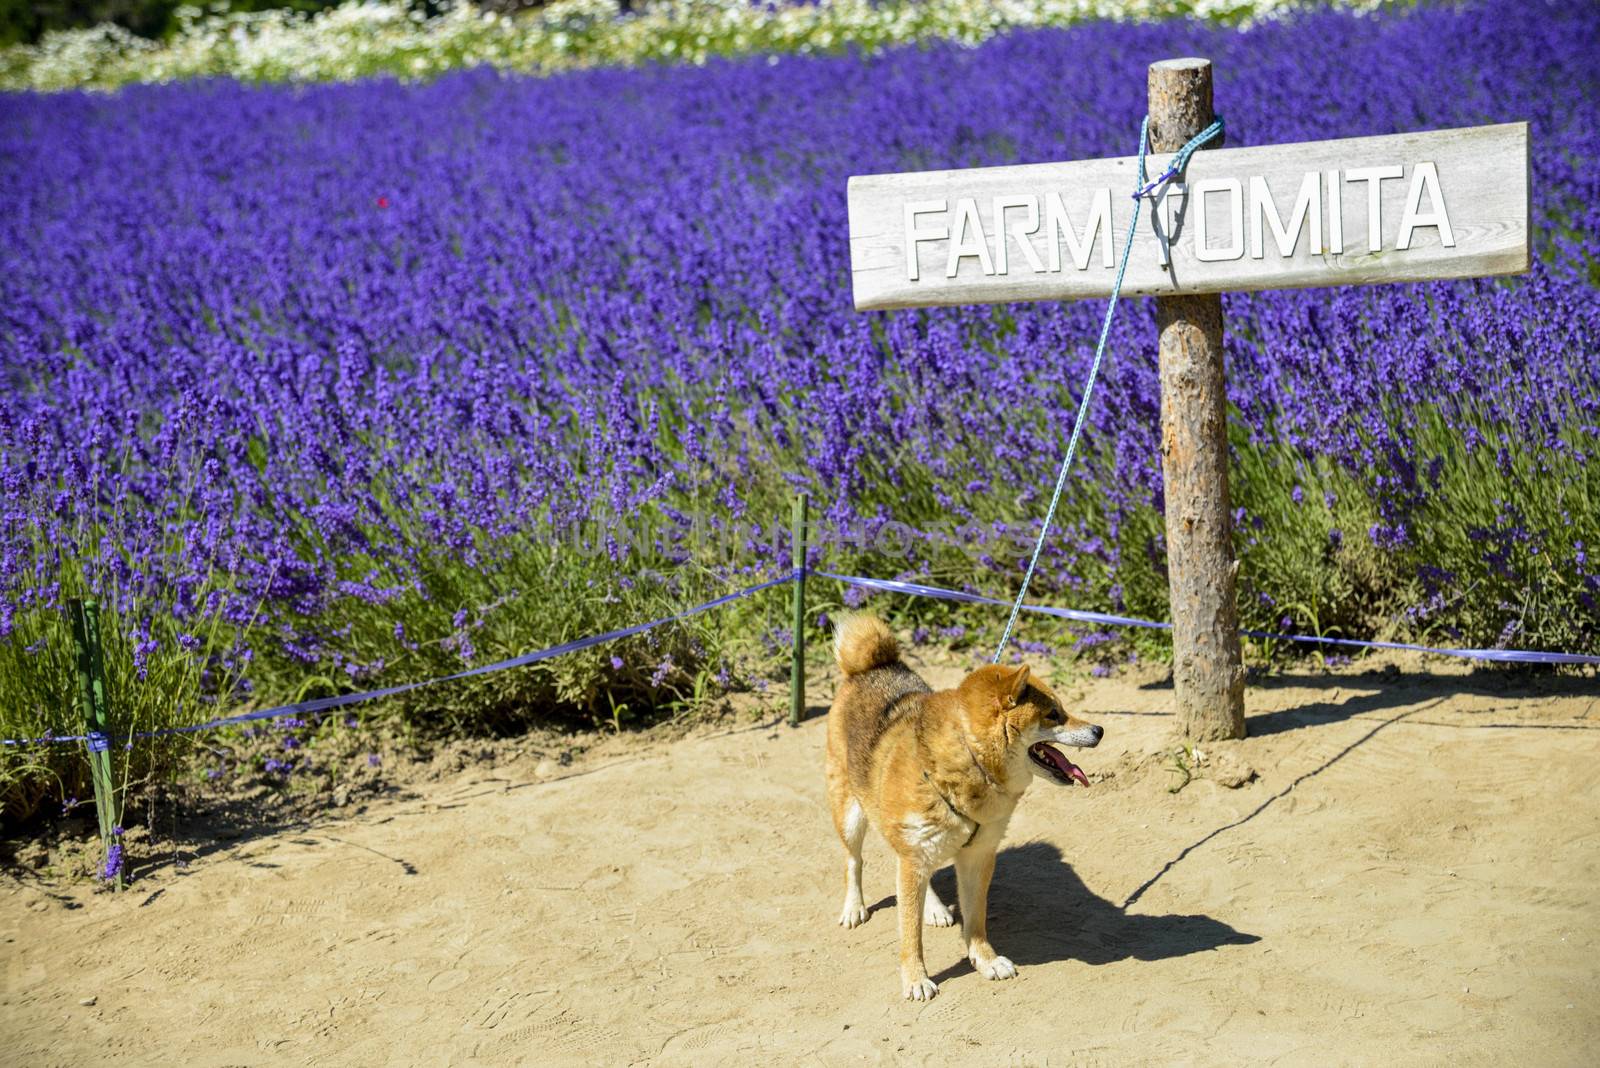 The dog and lavender field4 by gjeerawut